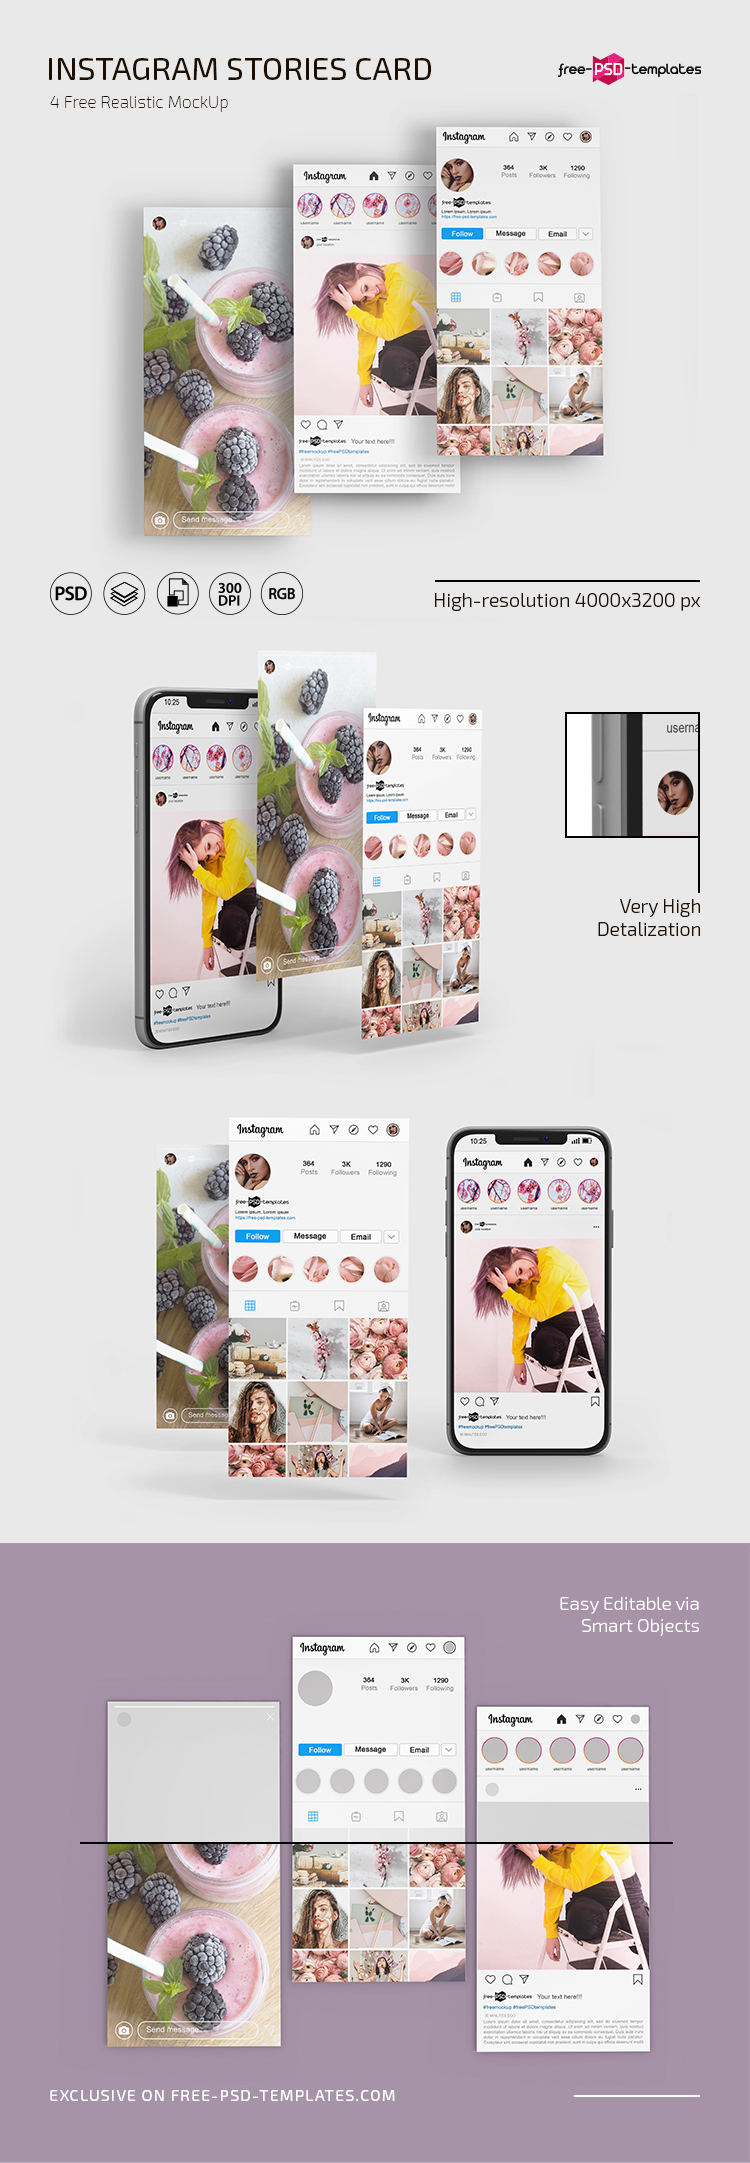 Download Free Instagram Stories Card Mockup In Psd Free Psd Templates